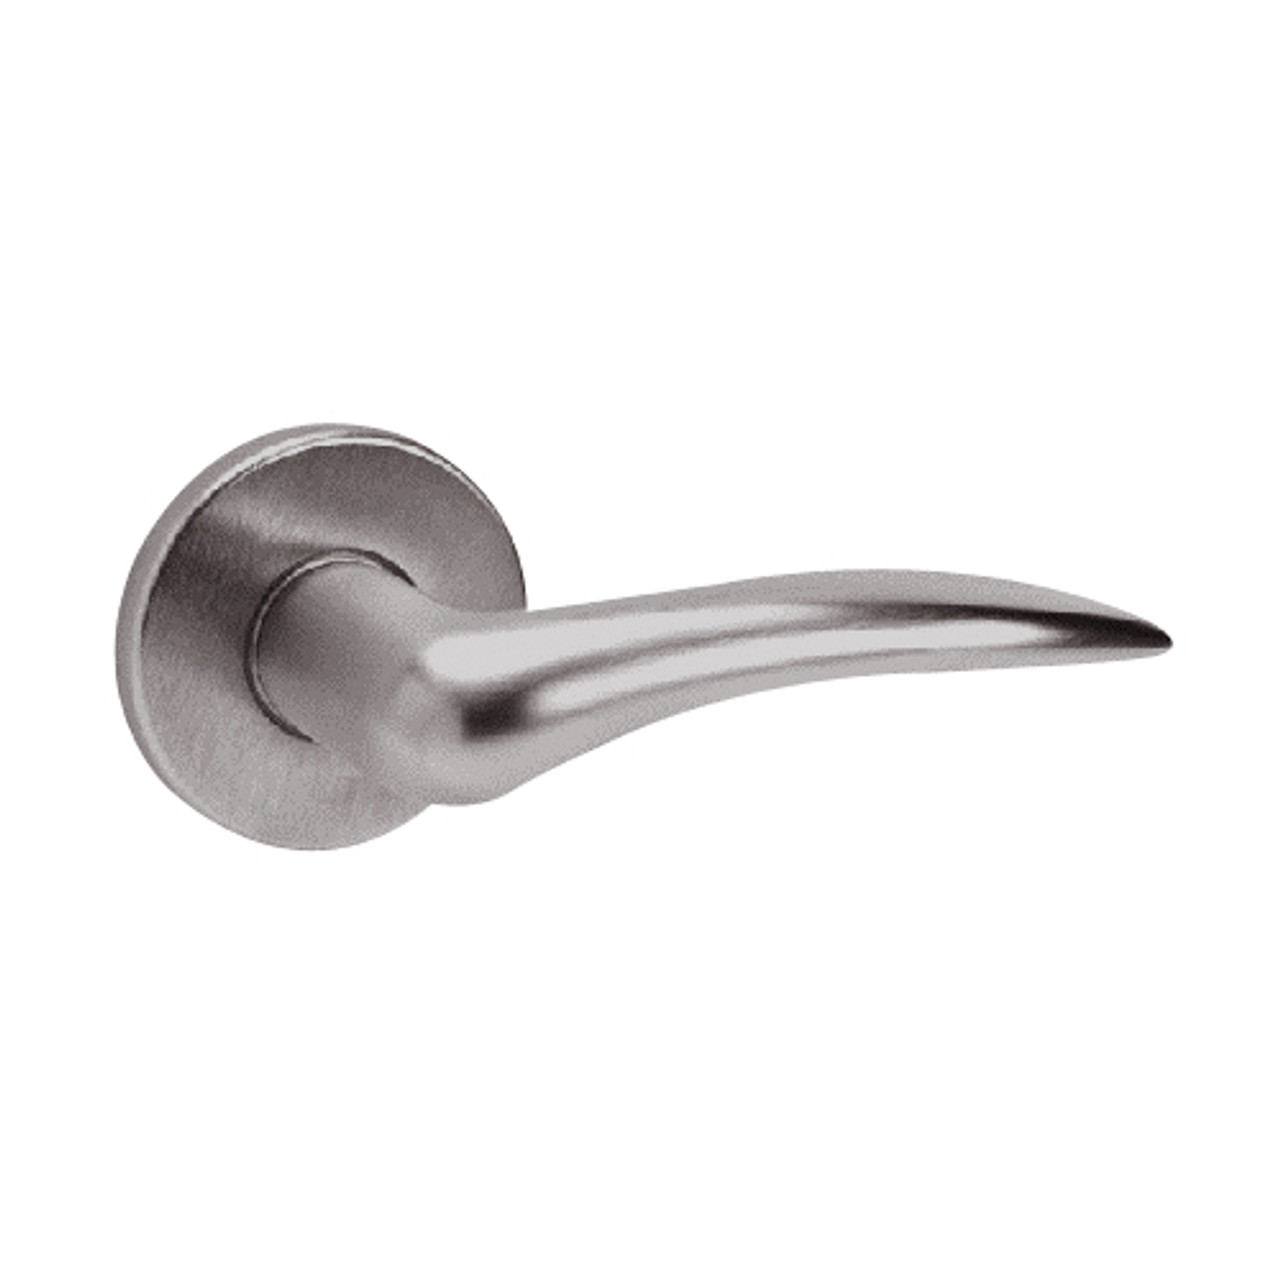 ML2055-DSA-630-M31-LH Corbin Russwin ML2000 Series Mortise Classroom Trim Pack with Dirke Lever in Satin Stainless